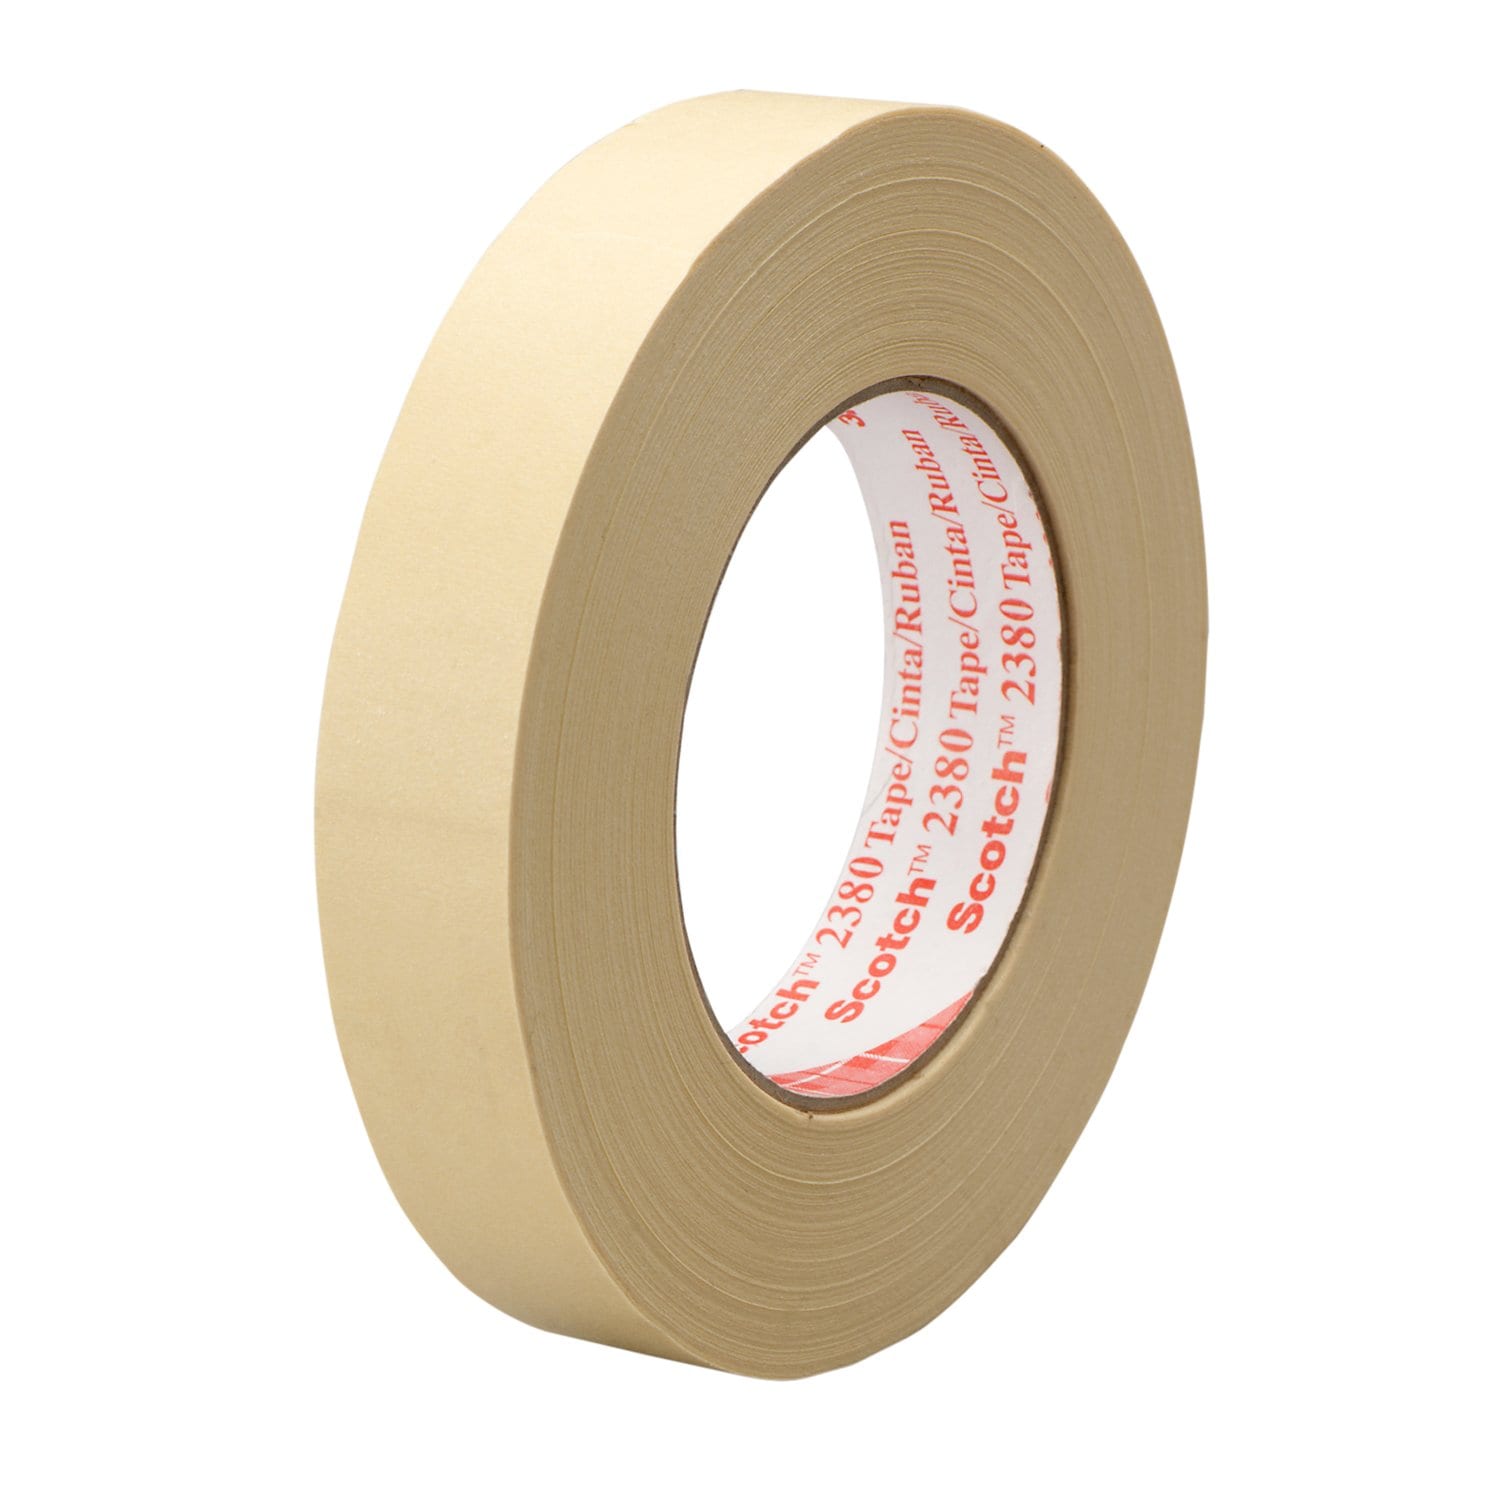 Carpet Tape 10yd/30ft Roll, For Rugs, Mats, Pads, Runners Anti